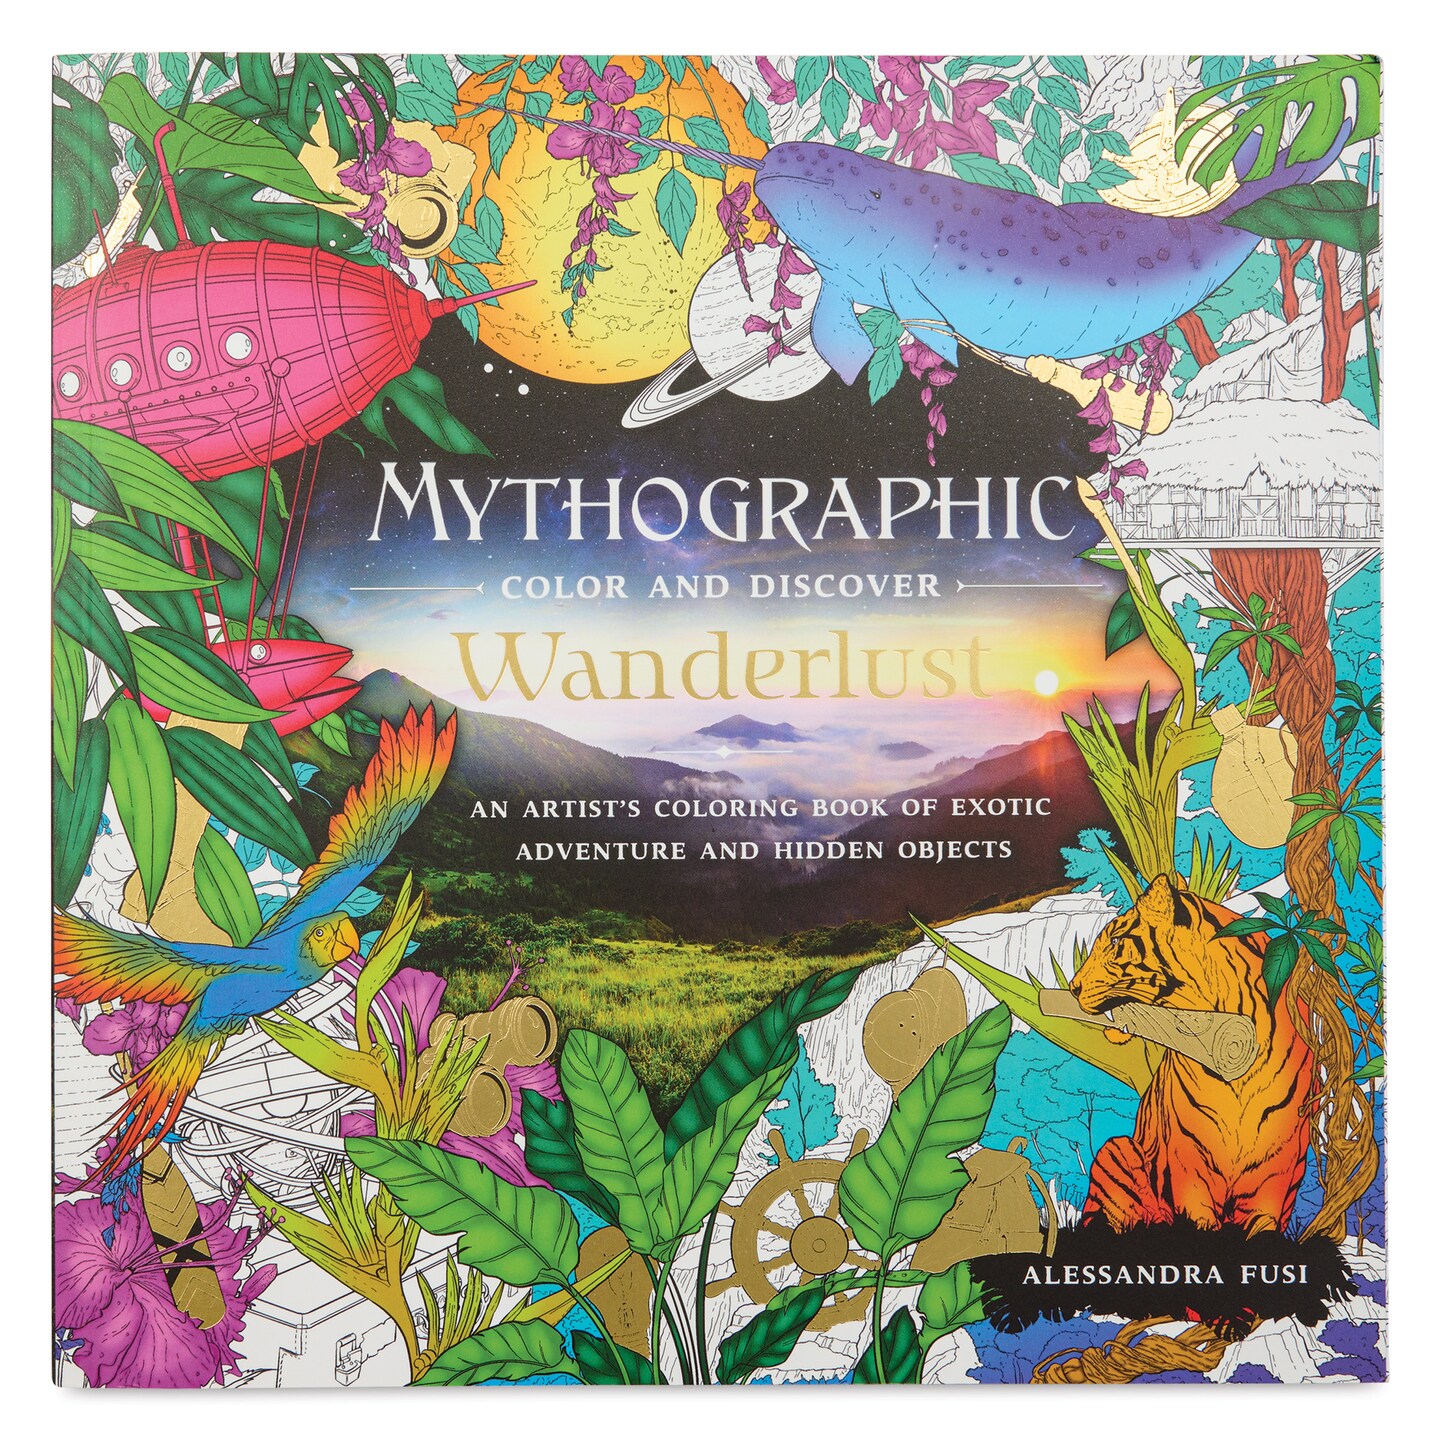 Mythographic Color and Discover: Wanderlust